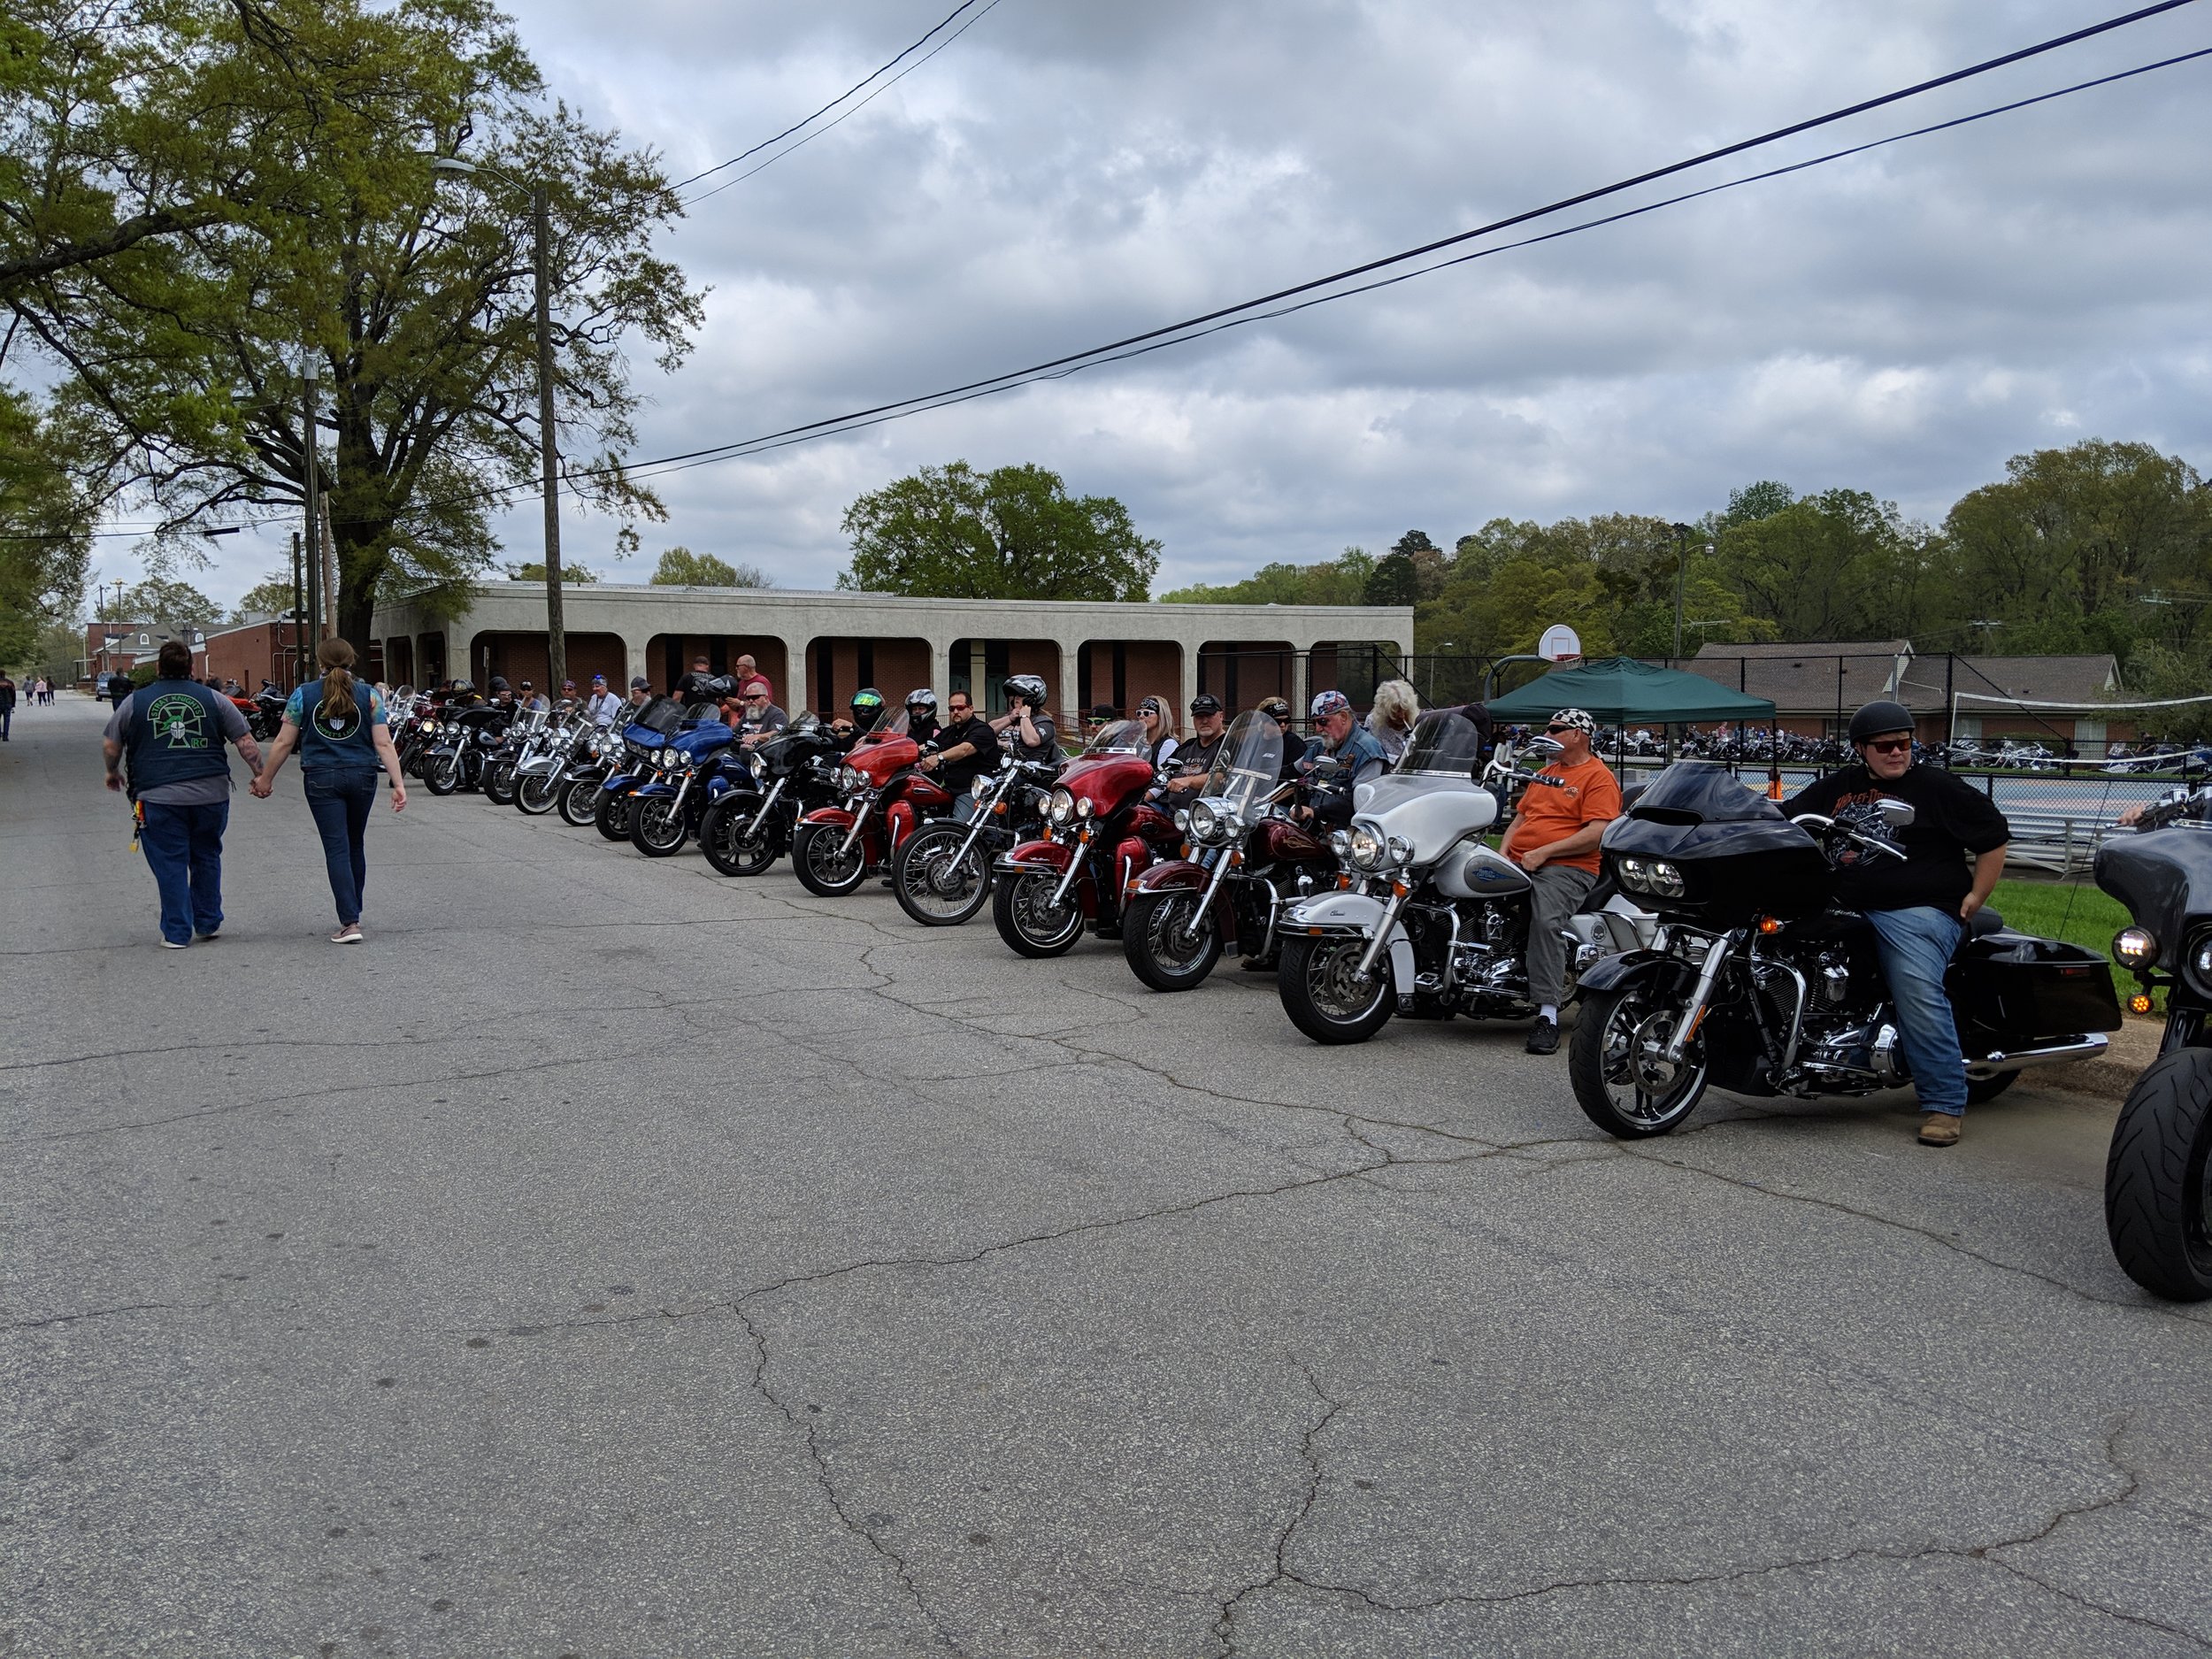 motorcycles lined up.jpg